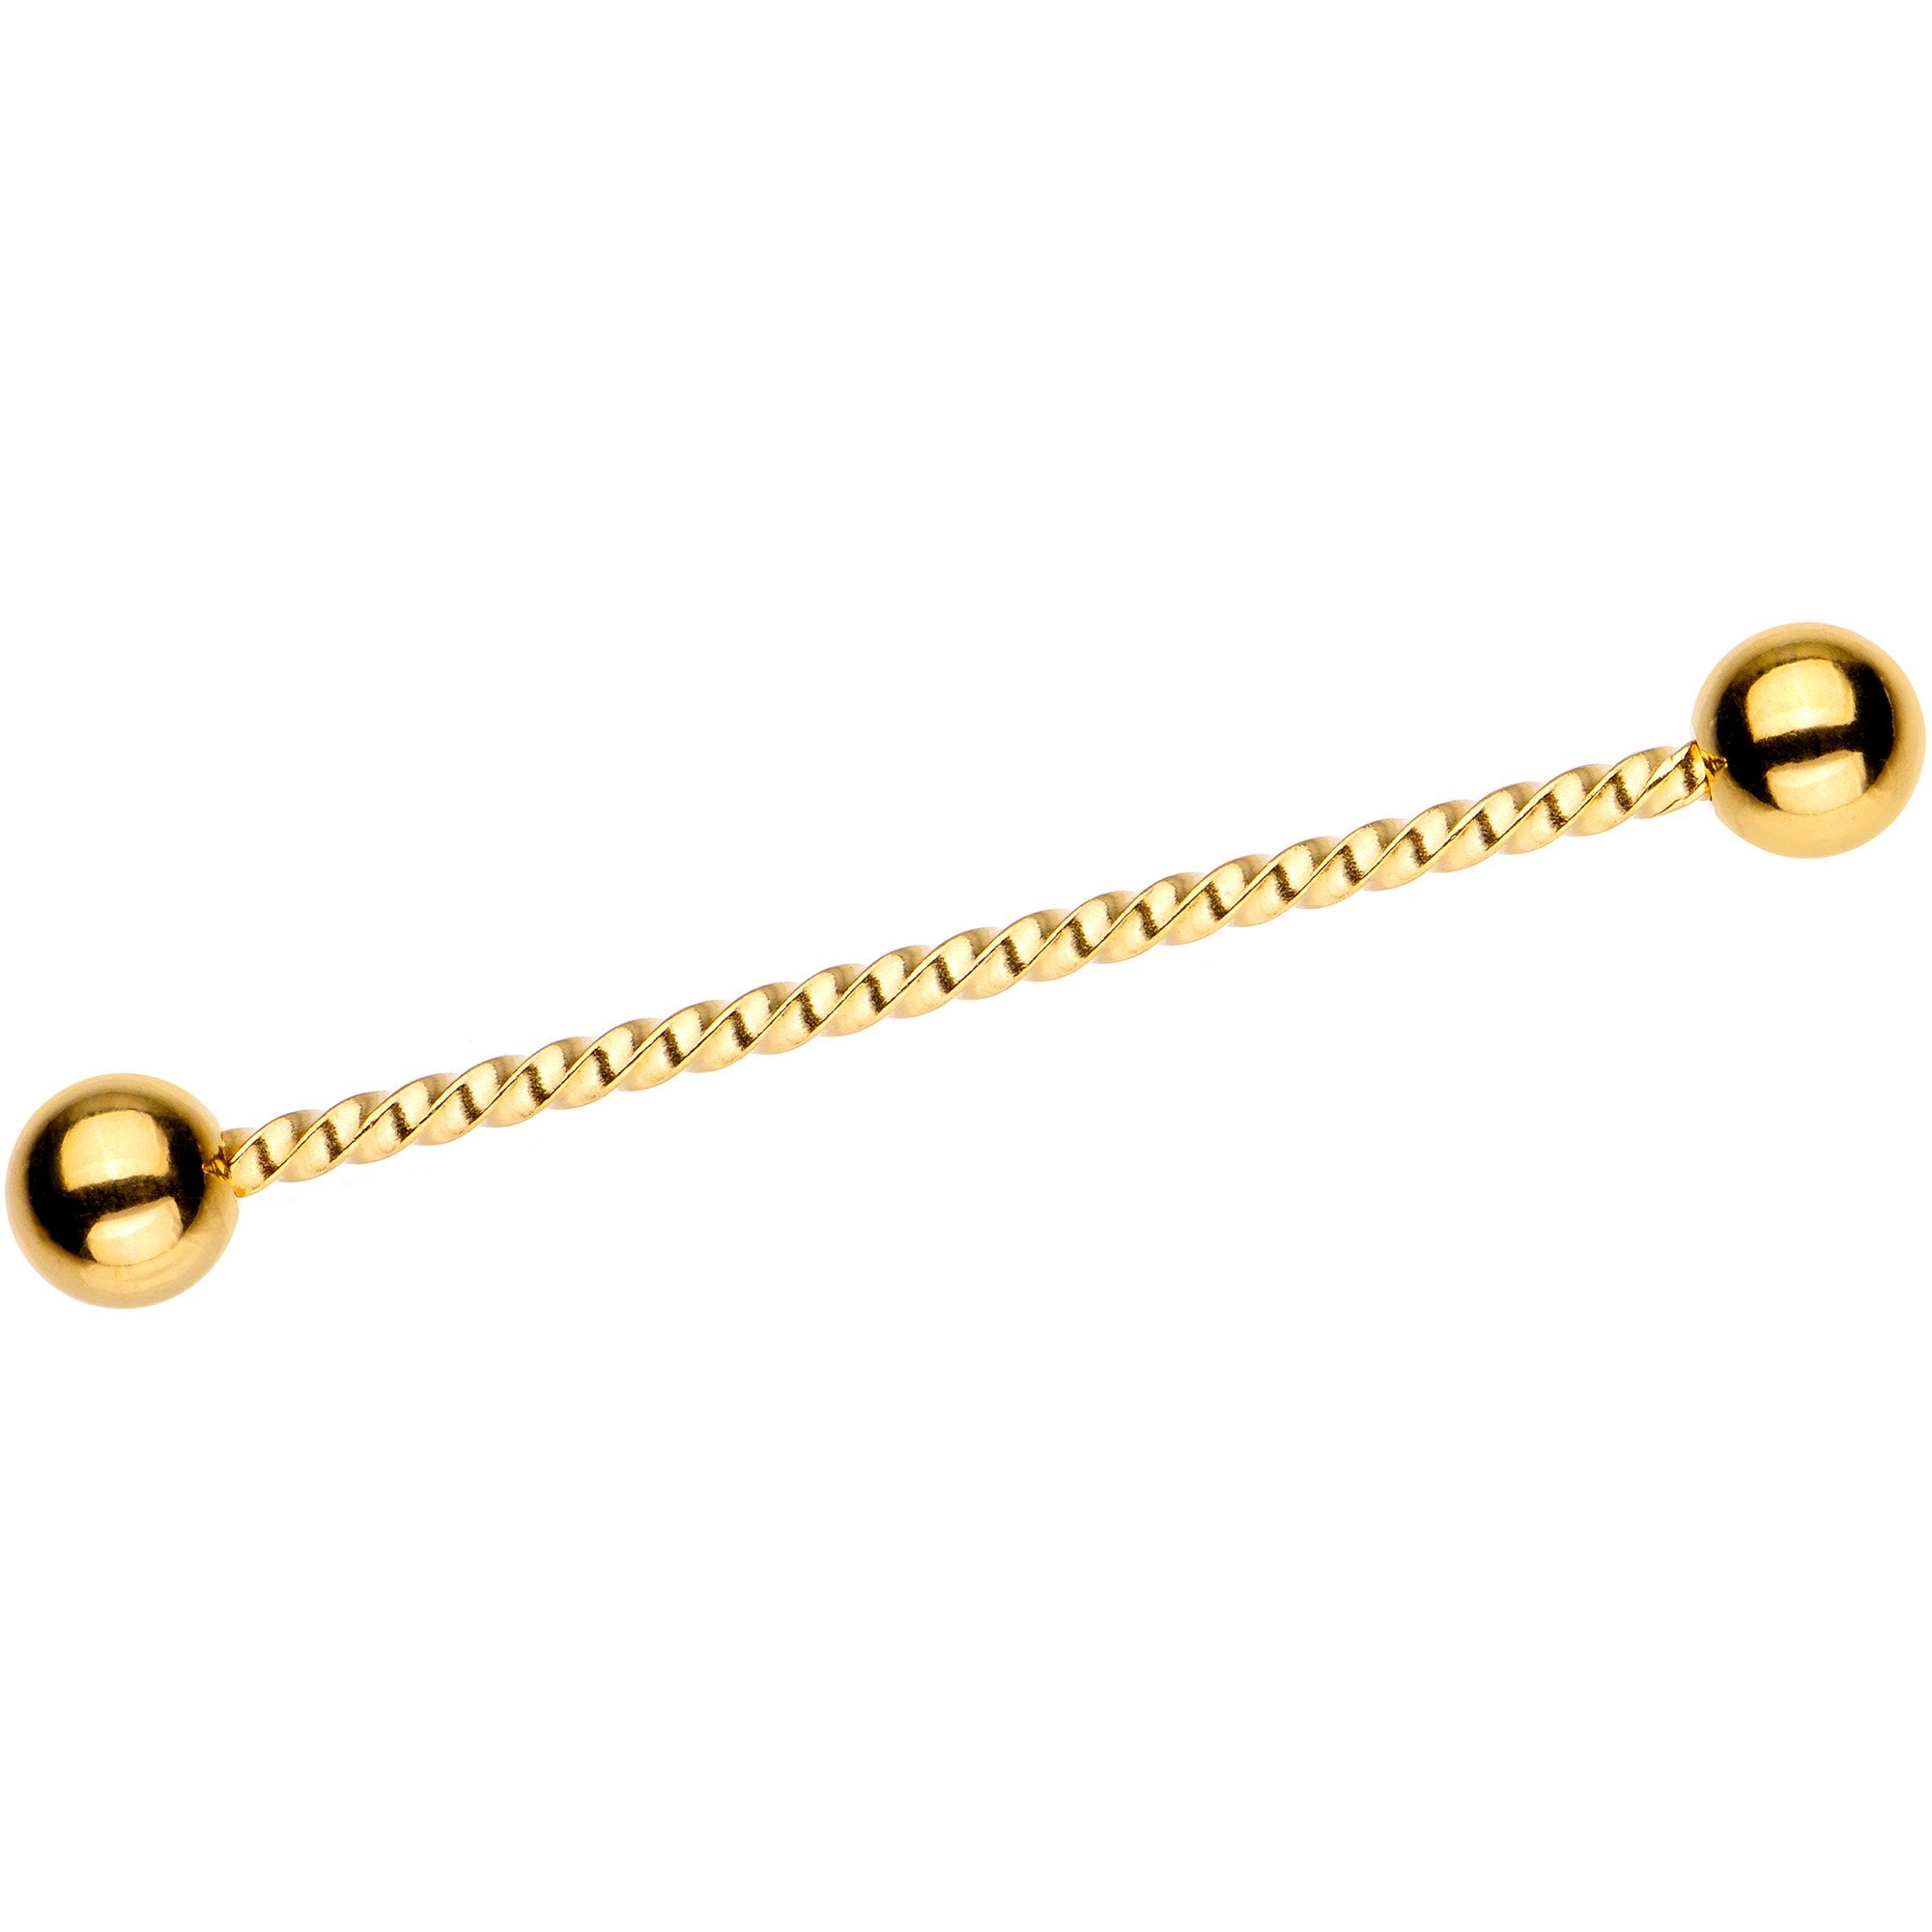 Gold Tone IP Seriously Twisted Industrial Barbell Earring 38mm